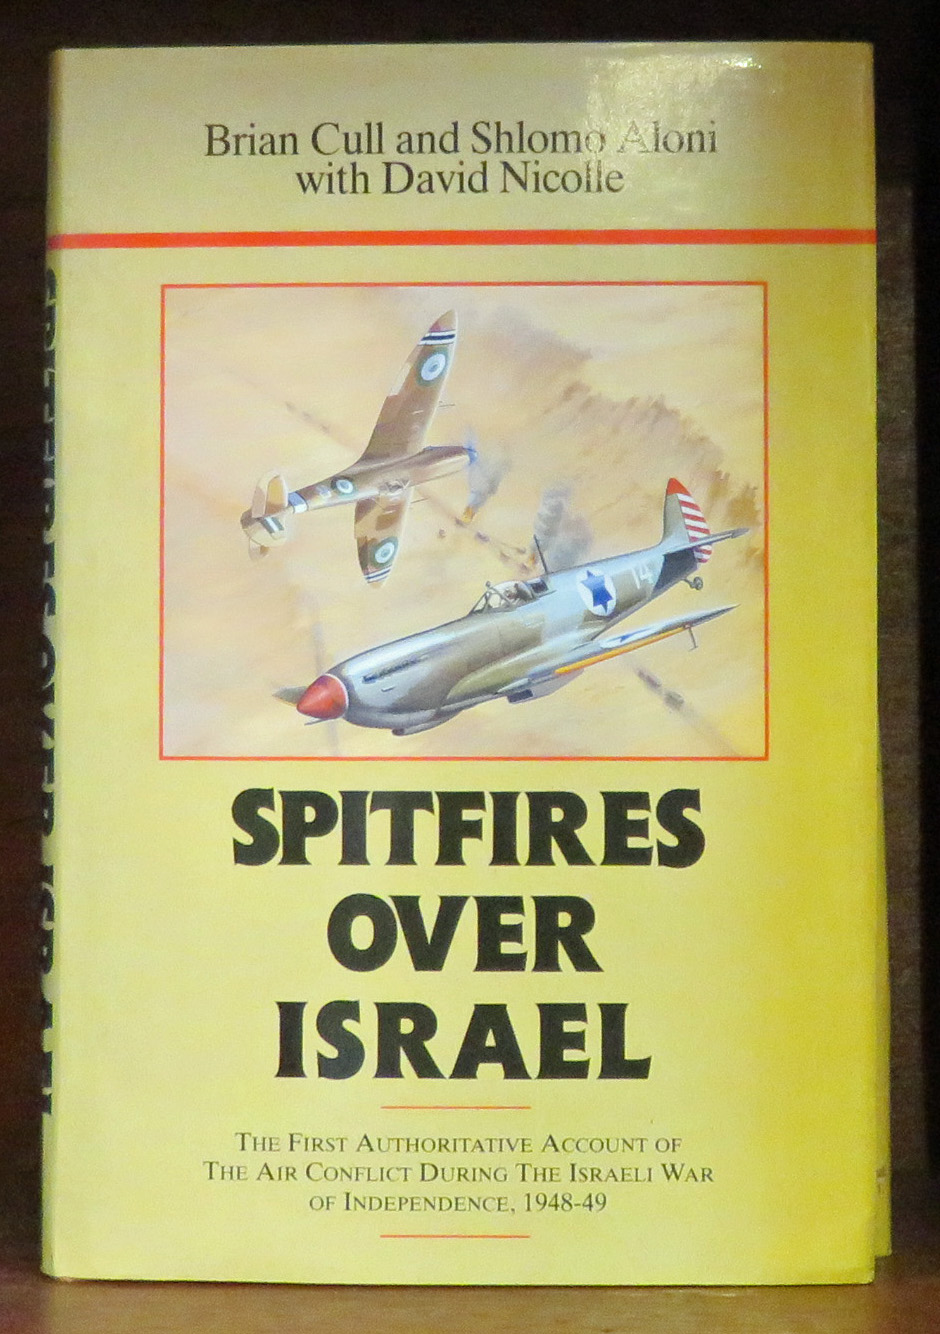 Spitfires Over Israel The First Authoritative Account of the Air Conflict During the Israeli War of Independence, 1948-49